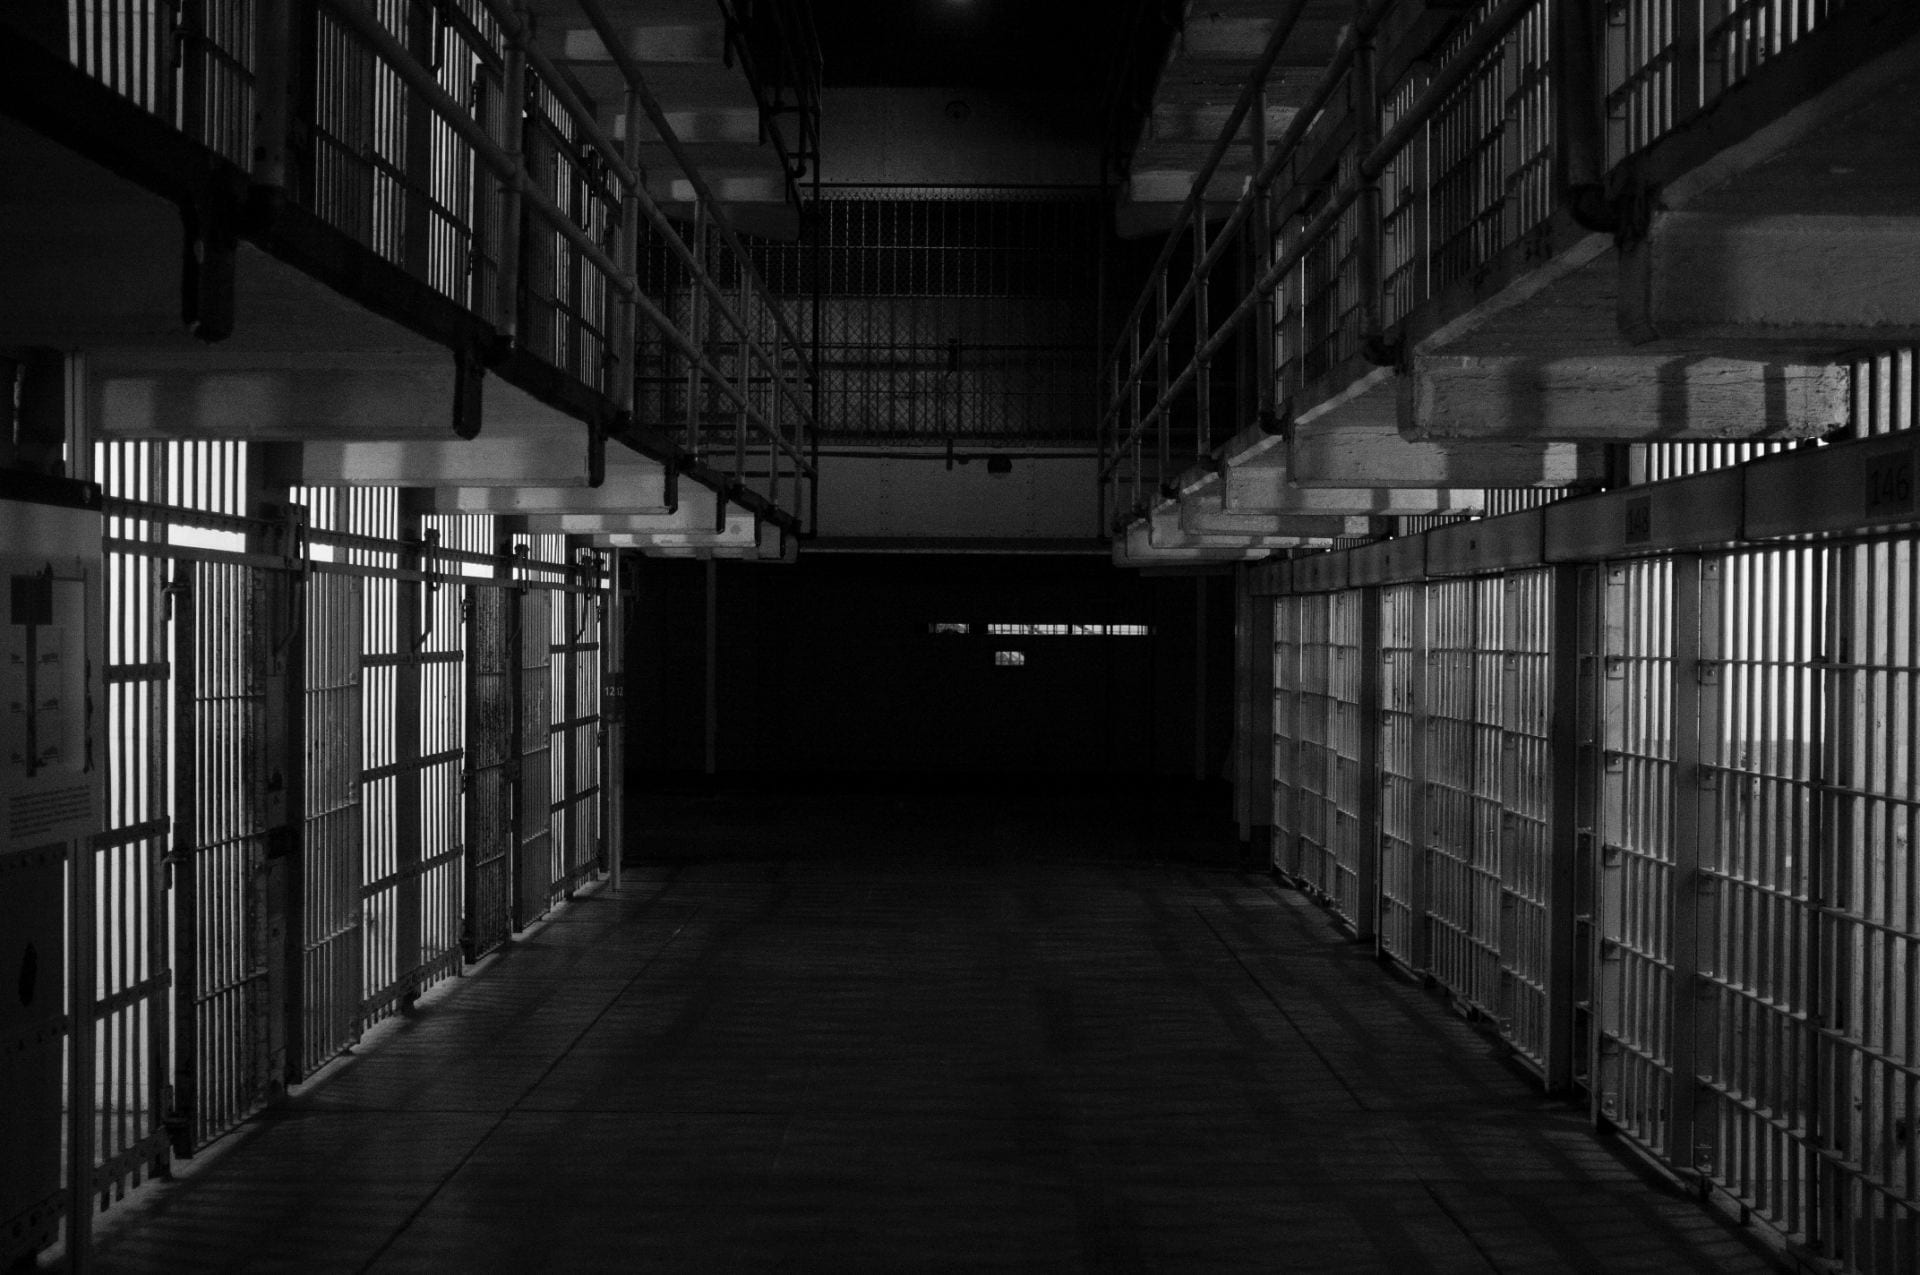 The image shows a corridor lines on either side by prison cells. There are two levels of prison cells. The prison cells have metal bars from the floor to the ceiling, and also some metal bars running along the length of the cells. Some of the entrances to the cells are open. There are no people in the image. The image has a very grim and foreboding atmosphere.